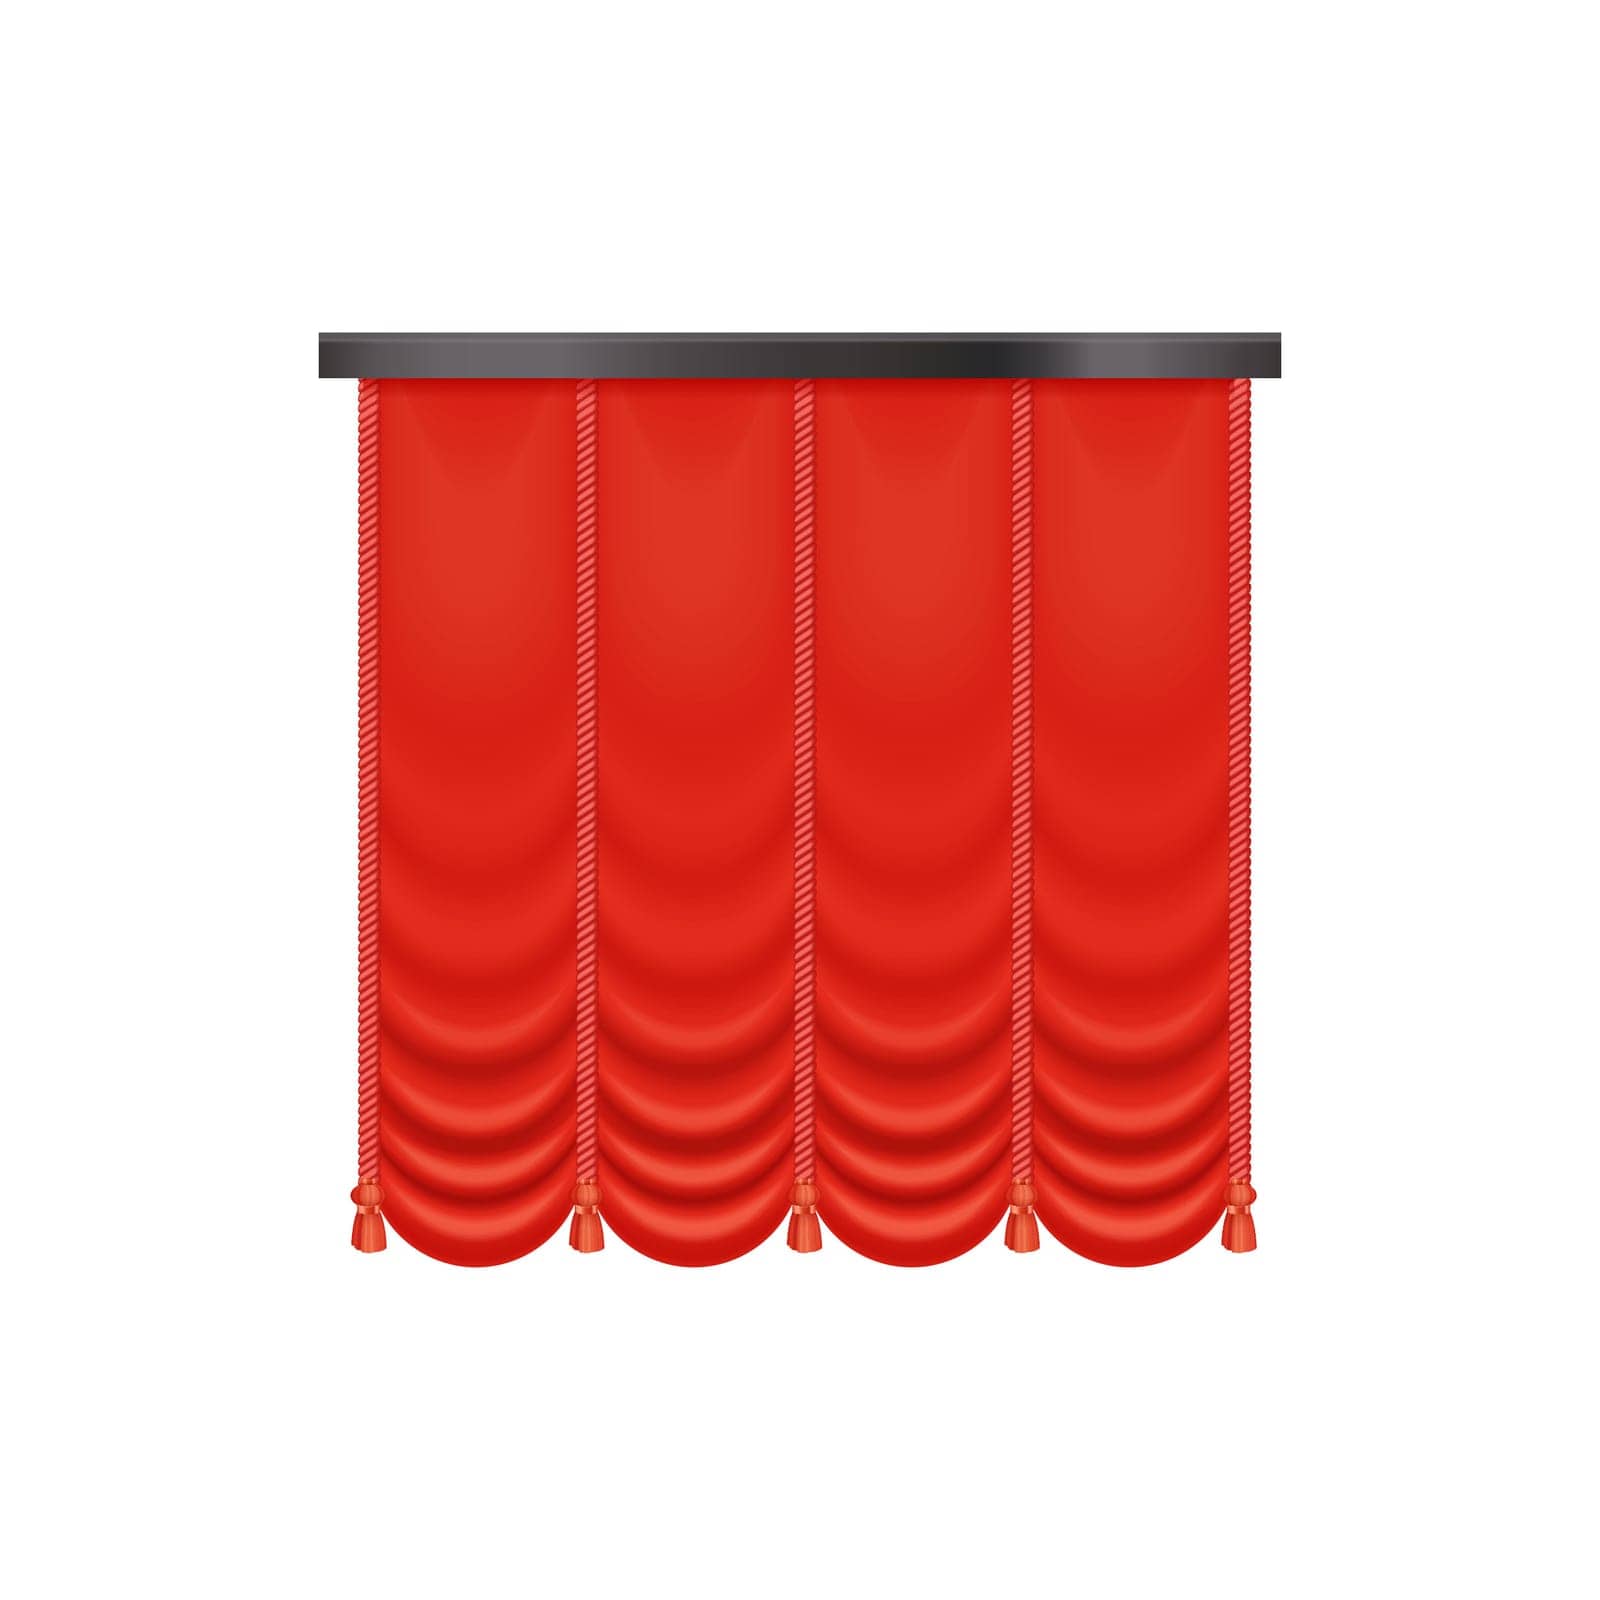 Red velvet, of satin closed curtains with 3D drapery for theatre stage, show or movie by Lembergvector